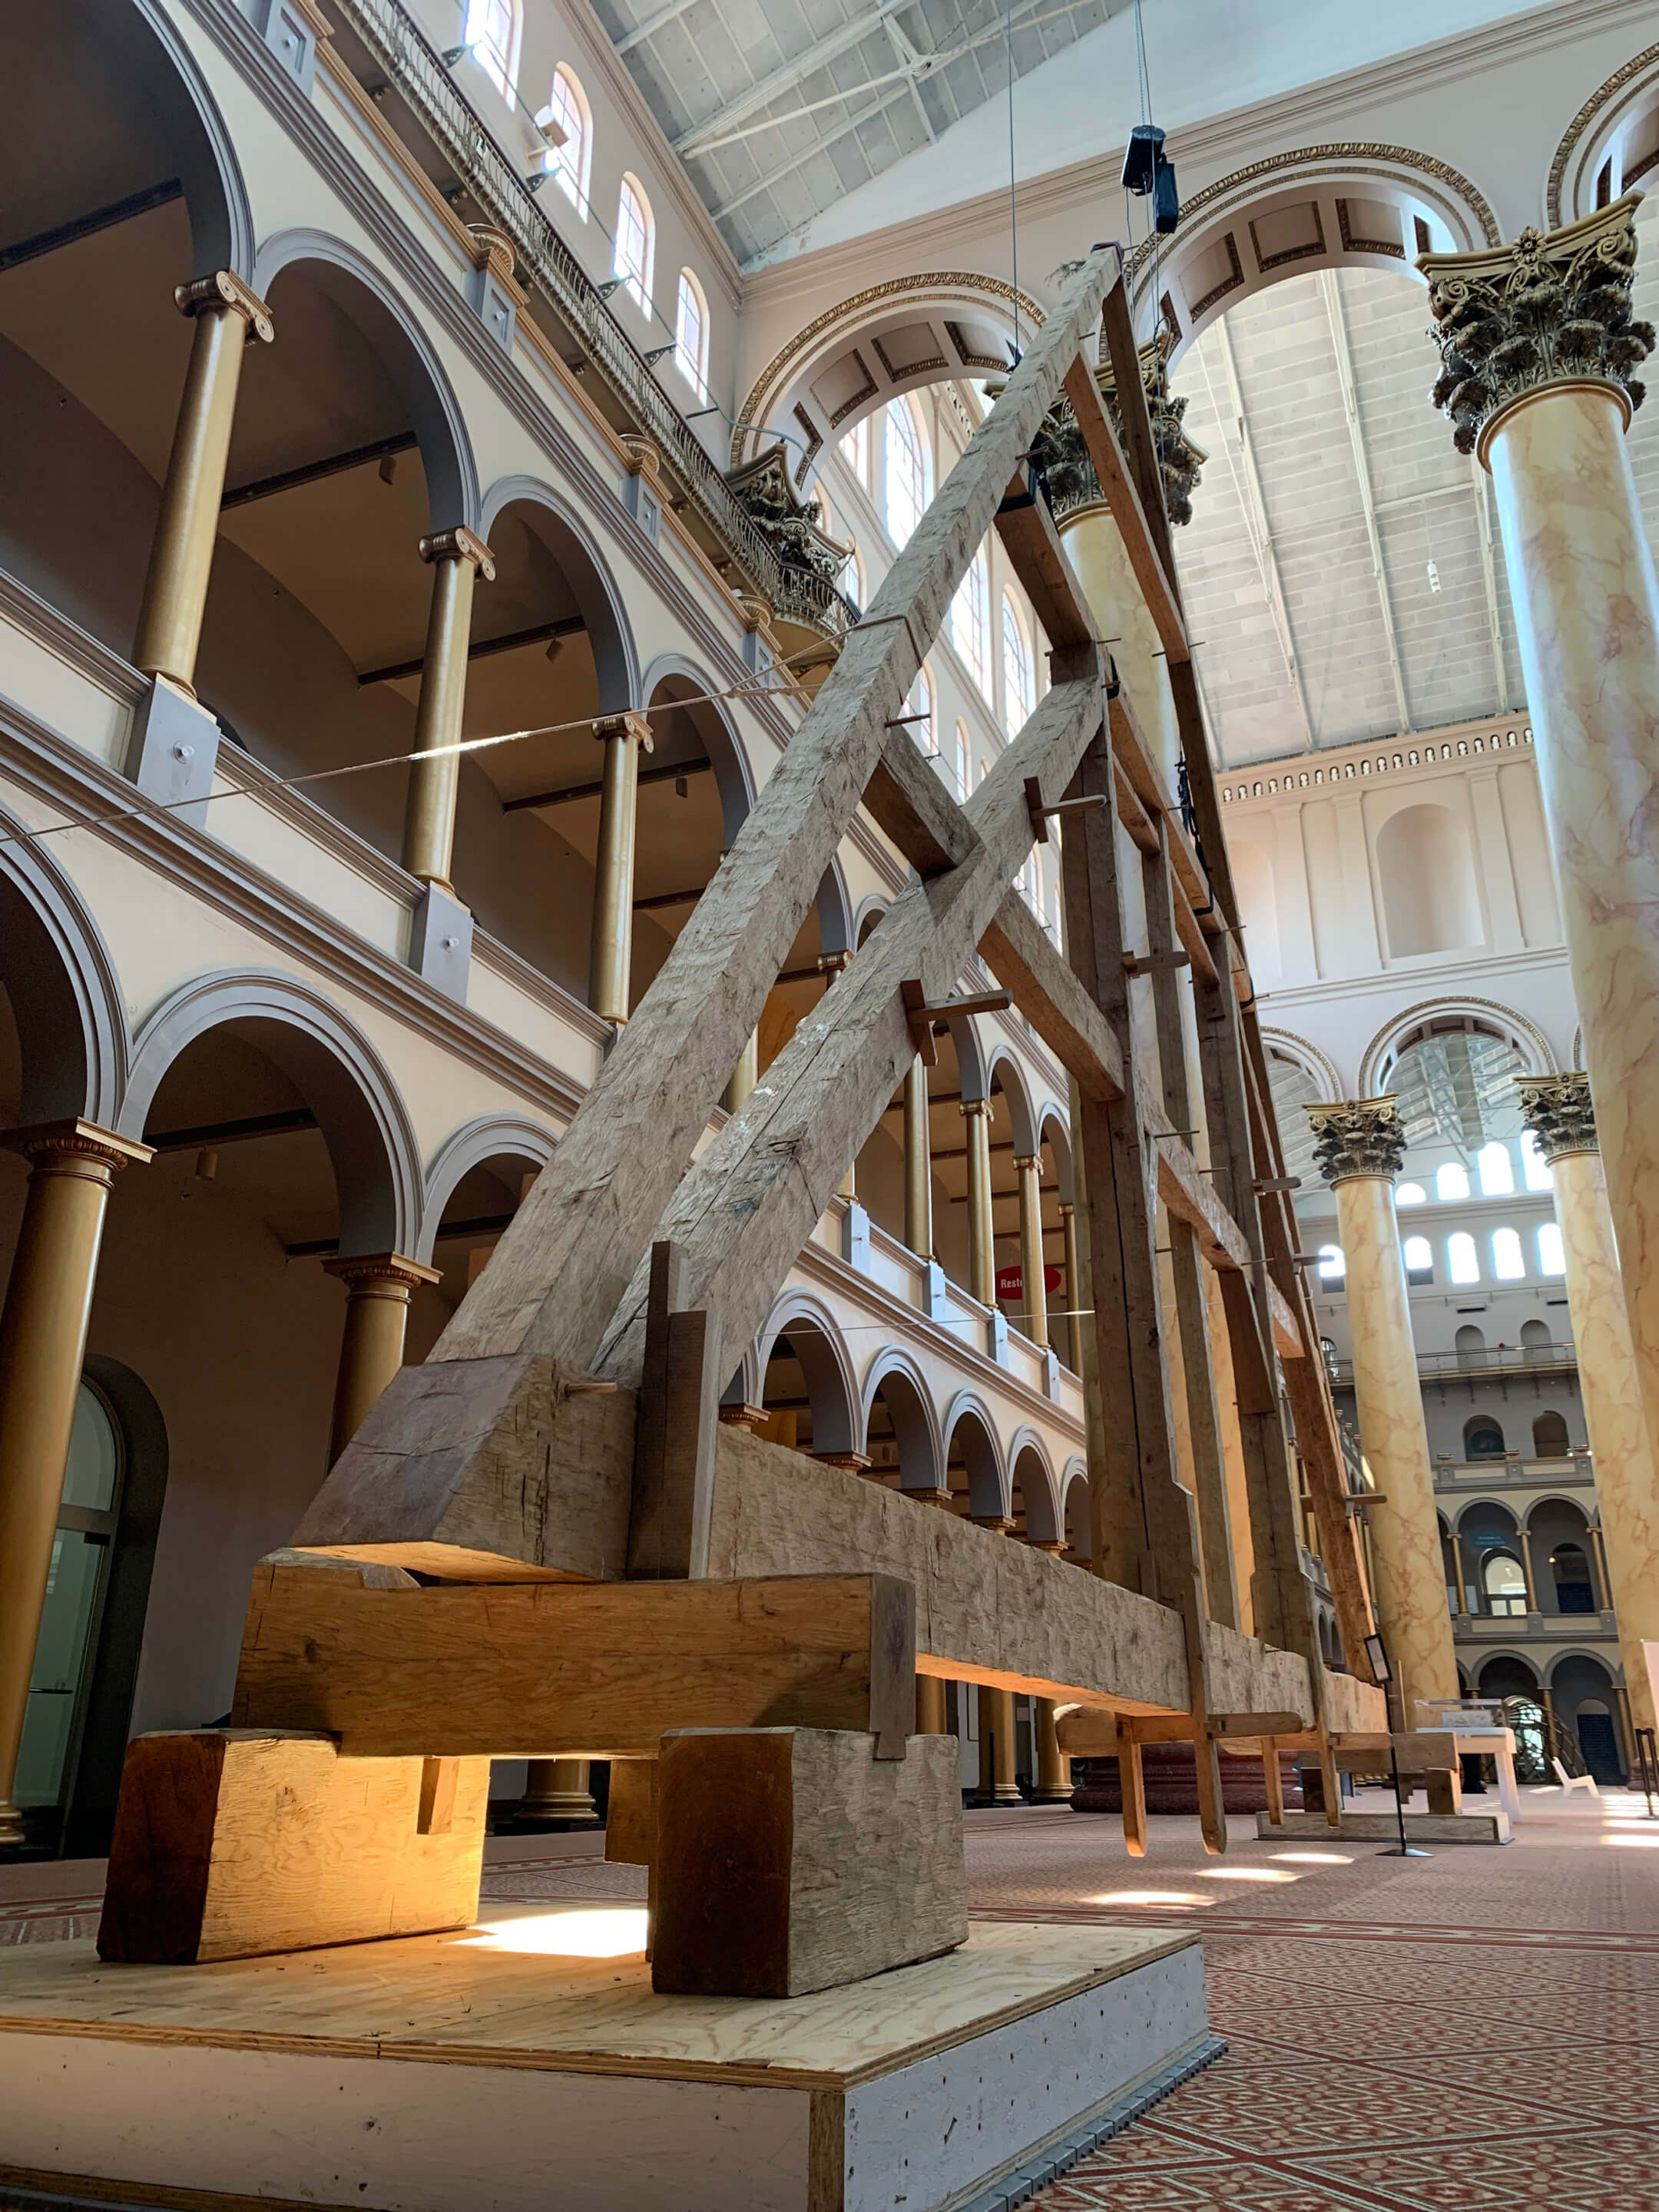 truss on display in the great hall of a museum